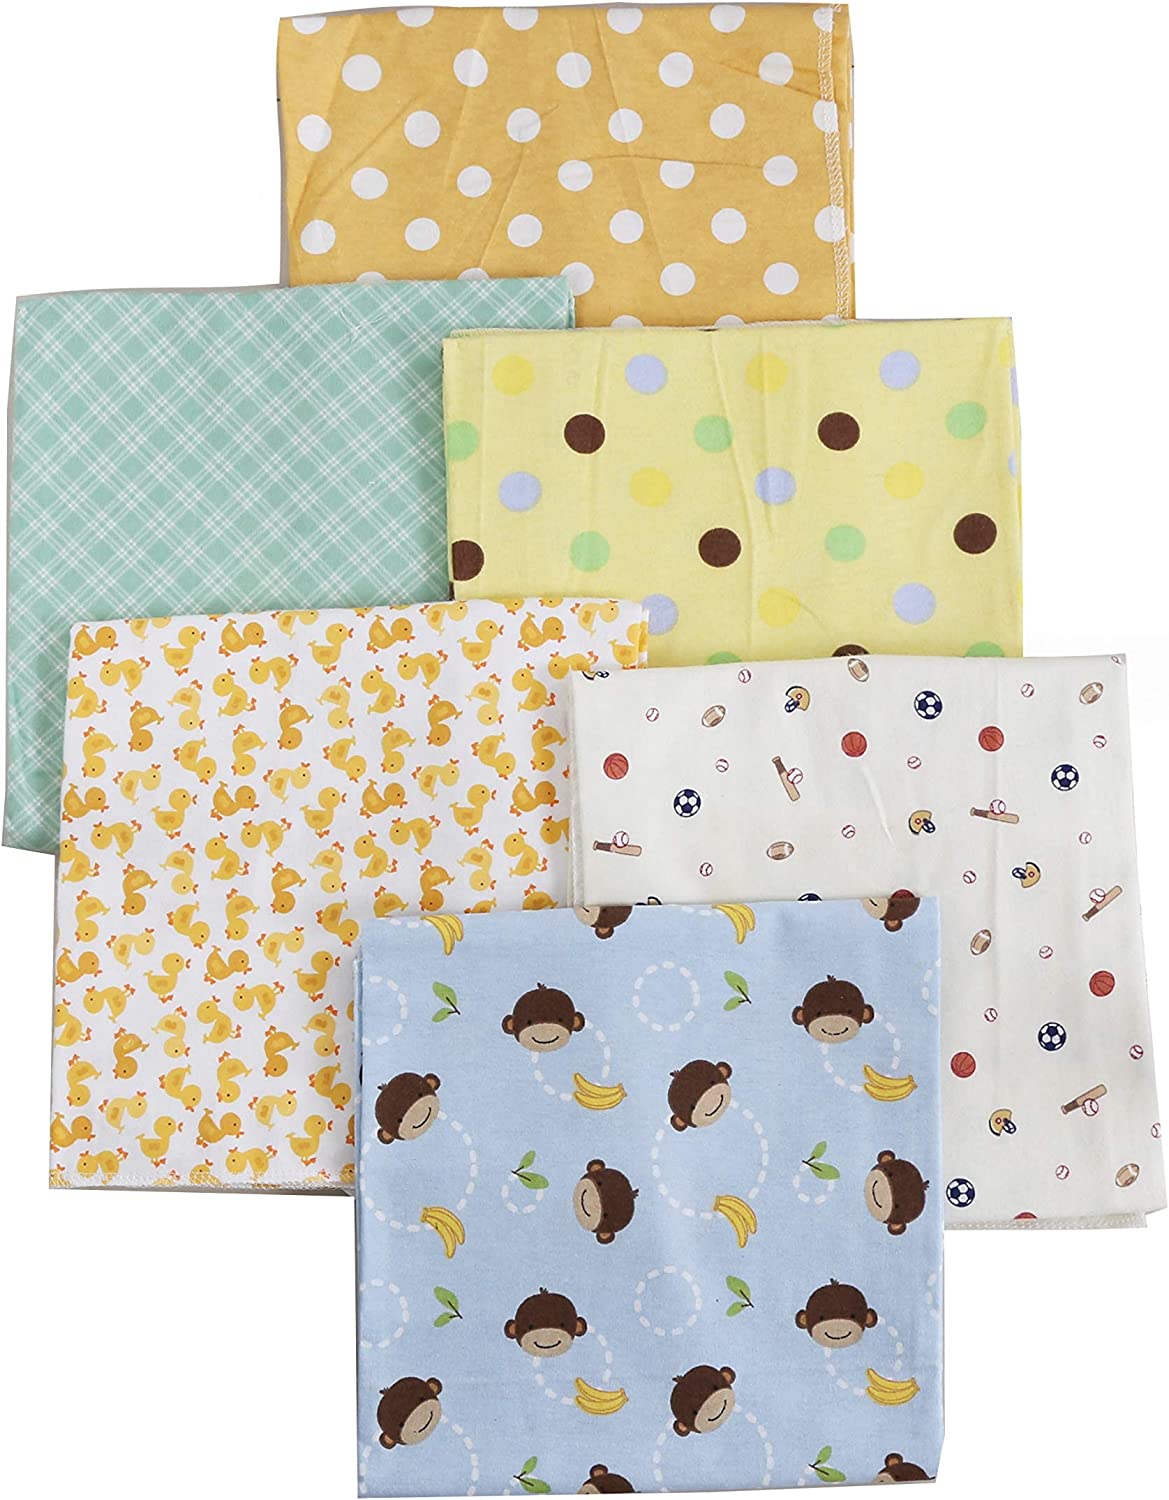 Receiving Blankets Unisex Yellow Duckling Polka Dot Blue Monkey Sports Cotton Flannel, 6-Pack, 30'' x 38'' (Yellow001)